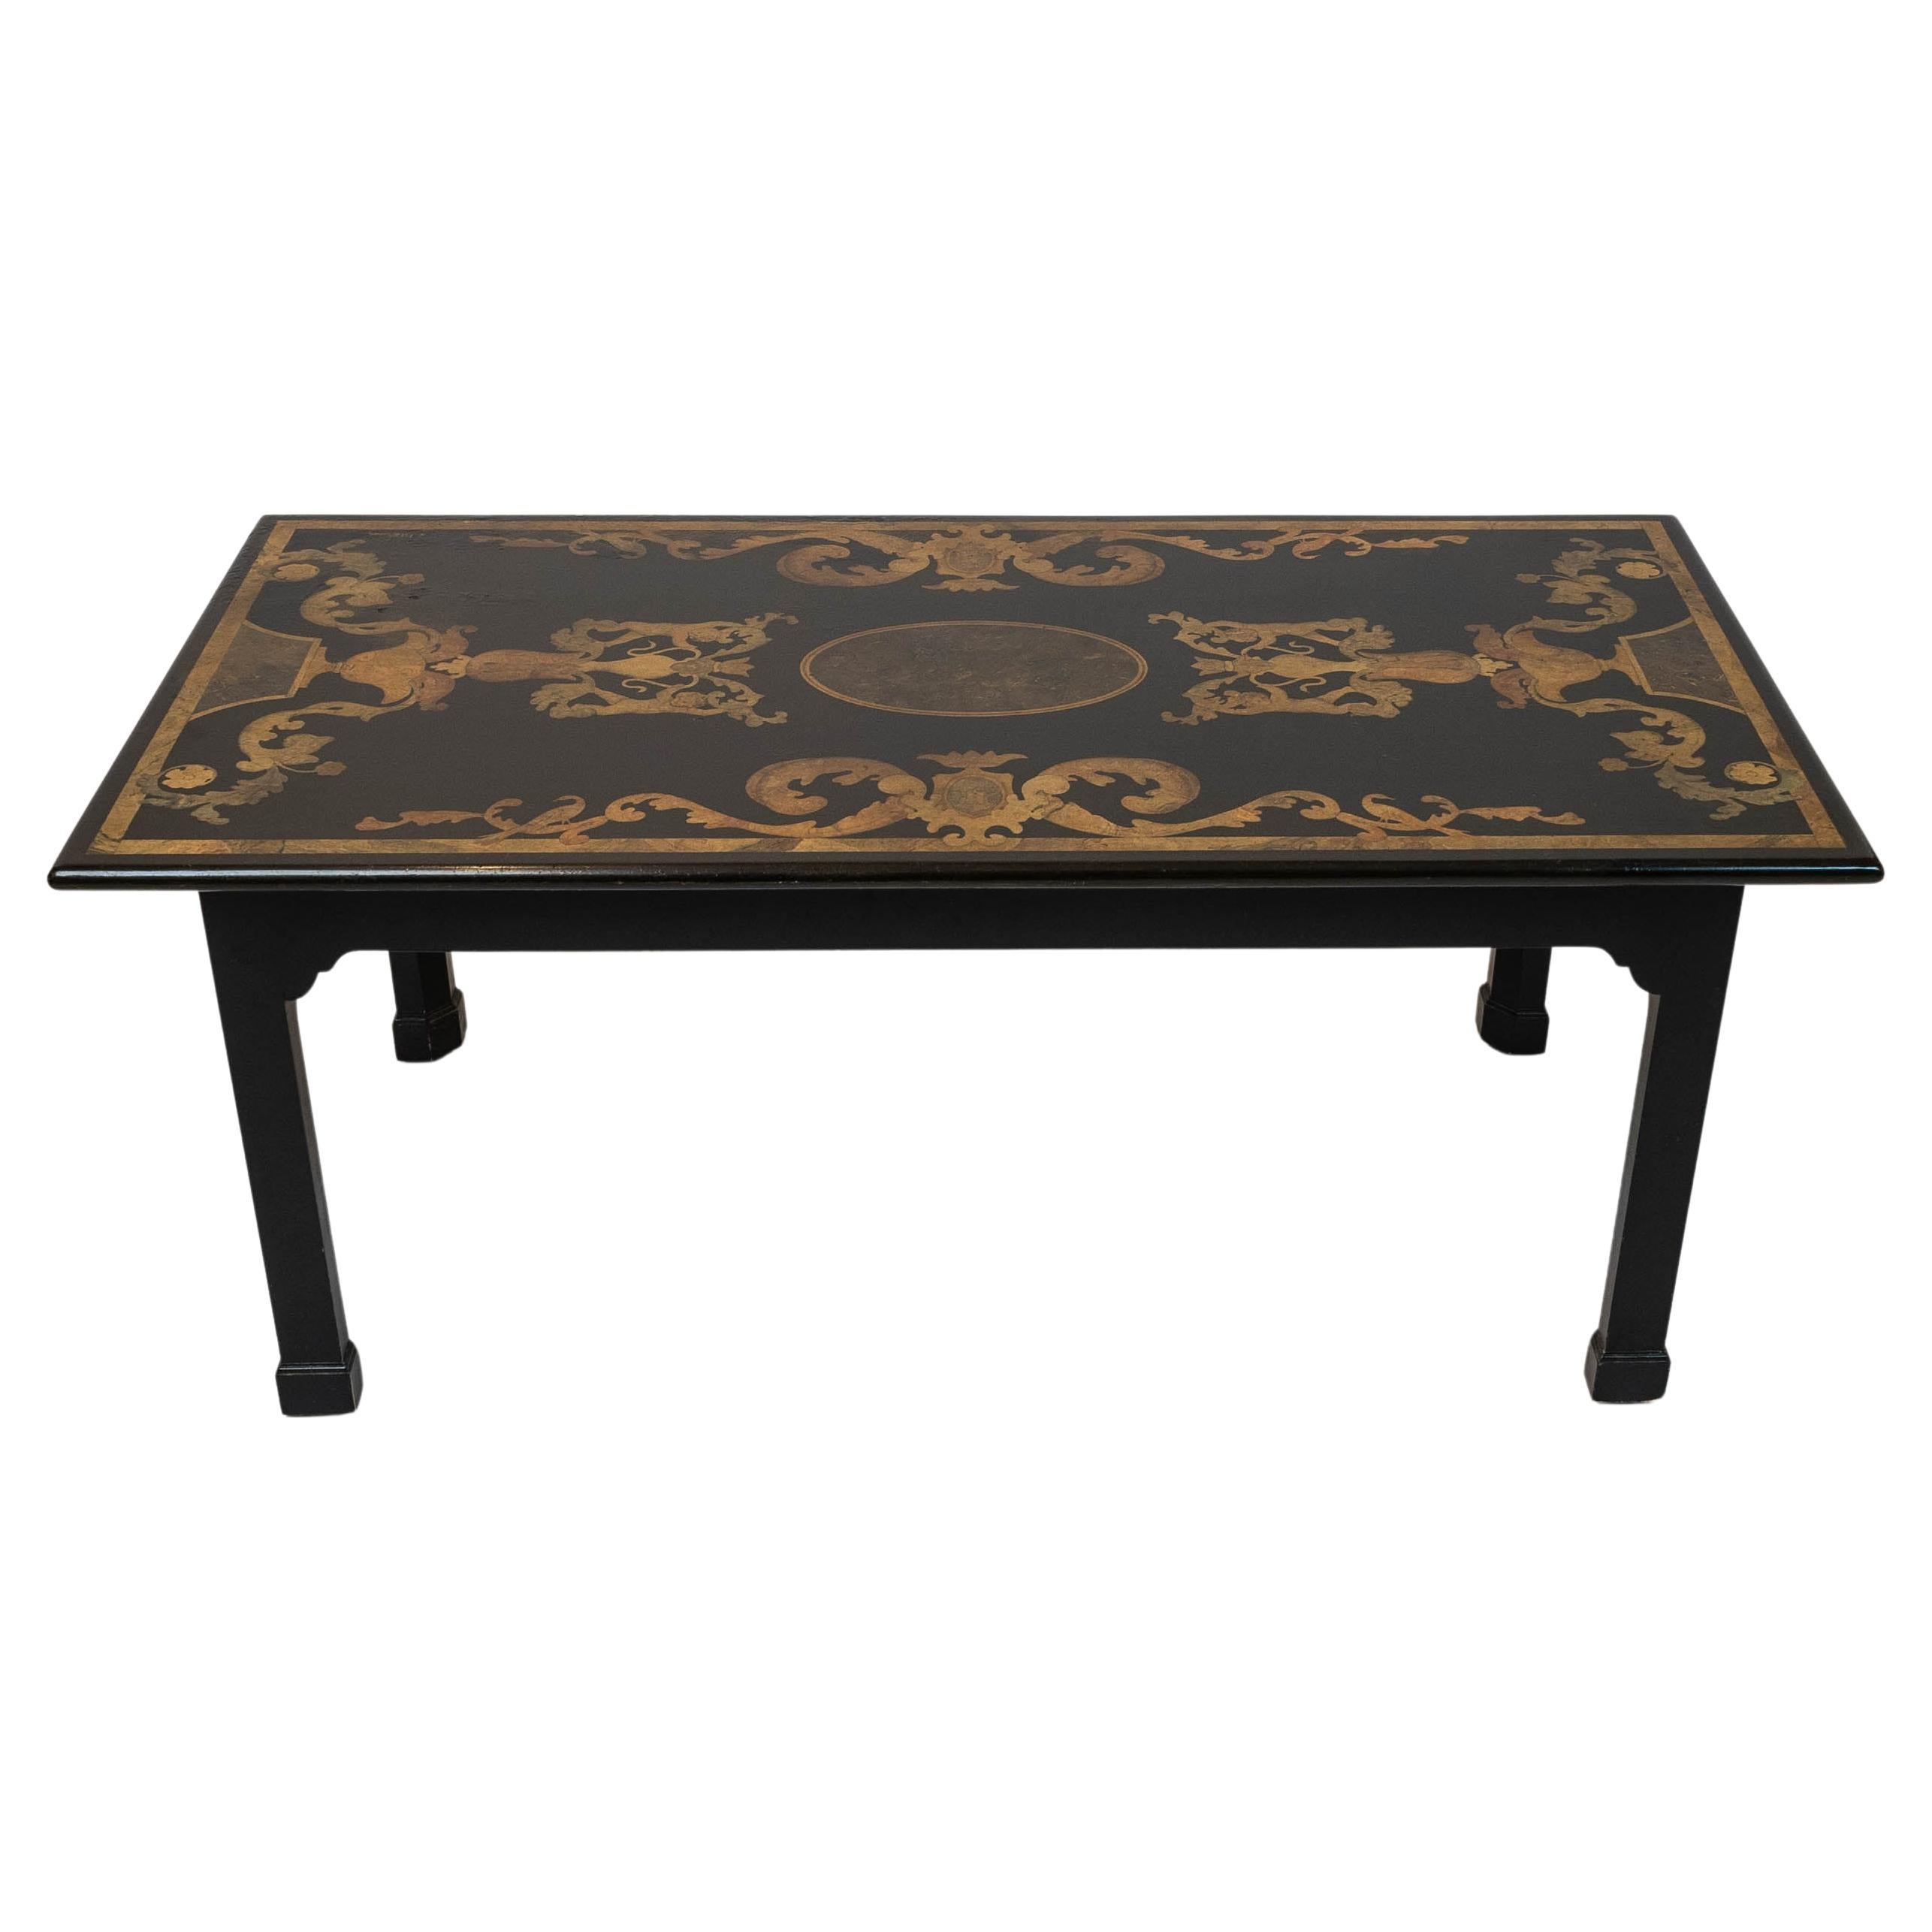 Vintage Neoclassical Style Slate Top Hand Painted Coffee Table